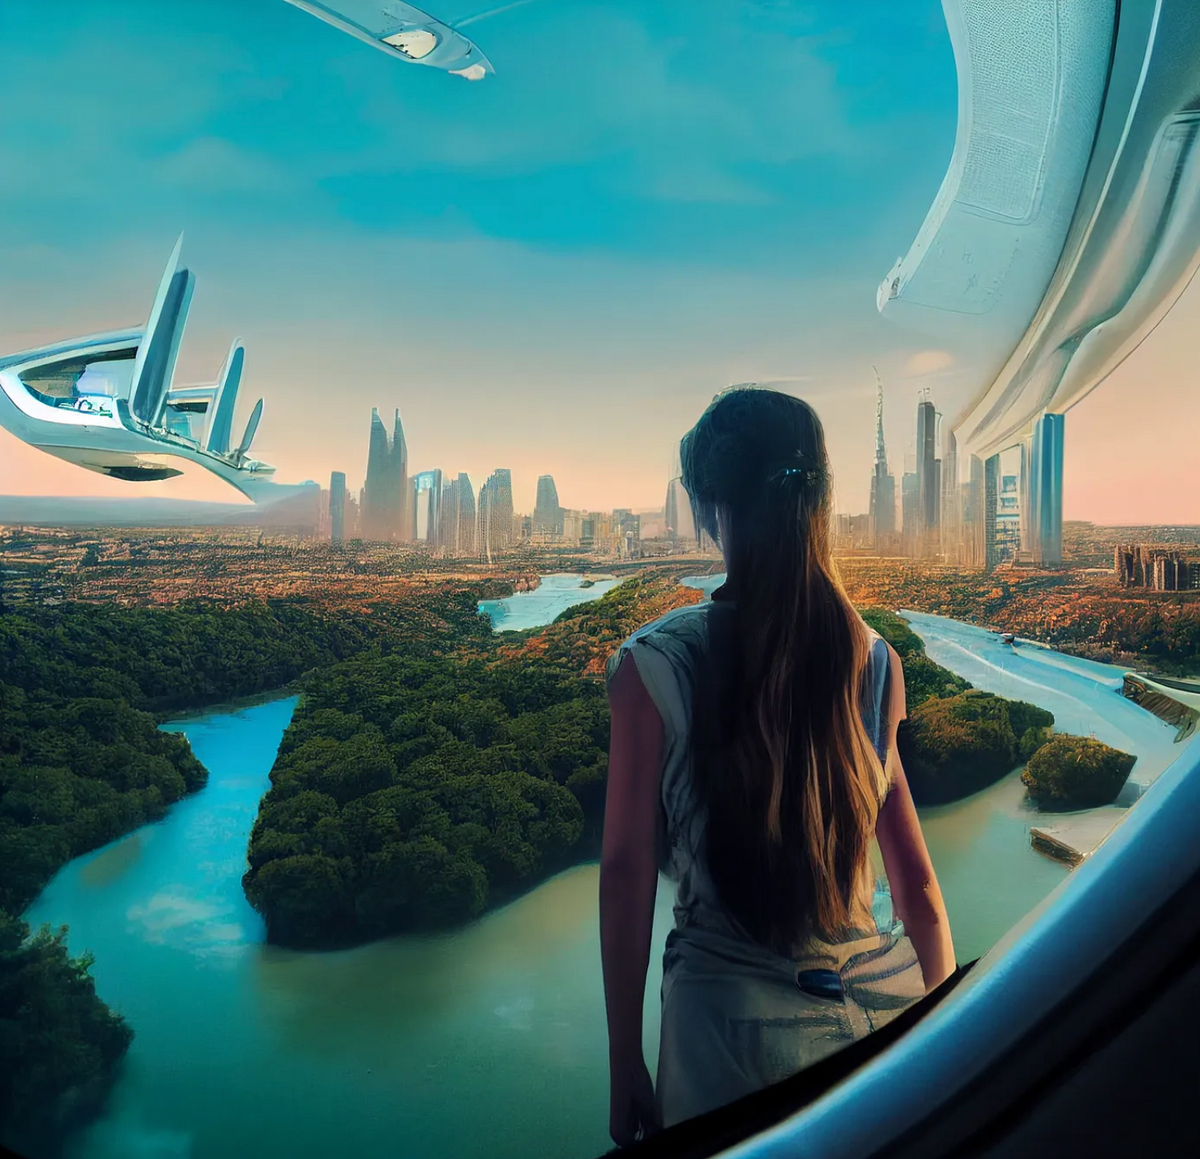 Mini-Flying Cities, Creation and Expansion using the power of Maglev Technology